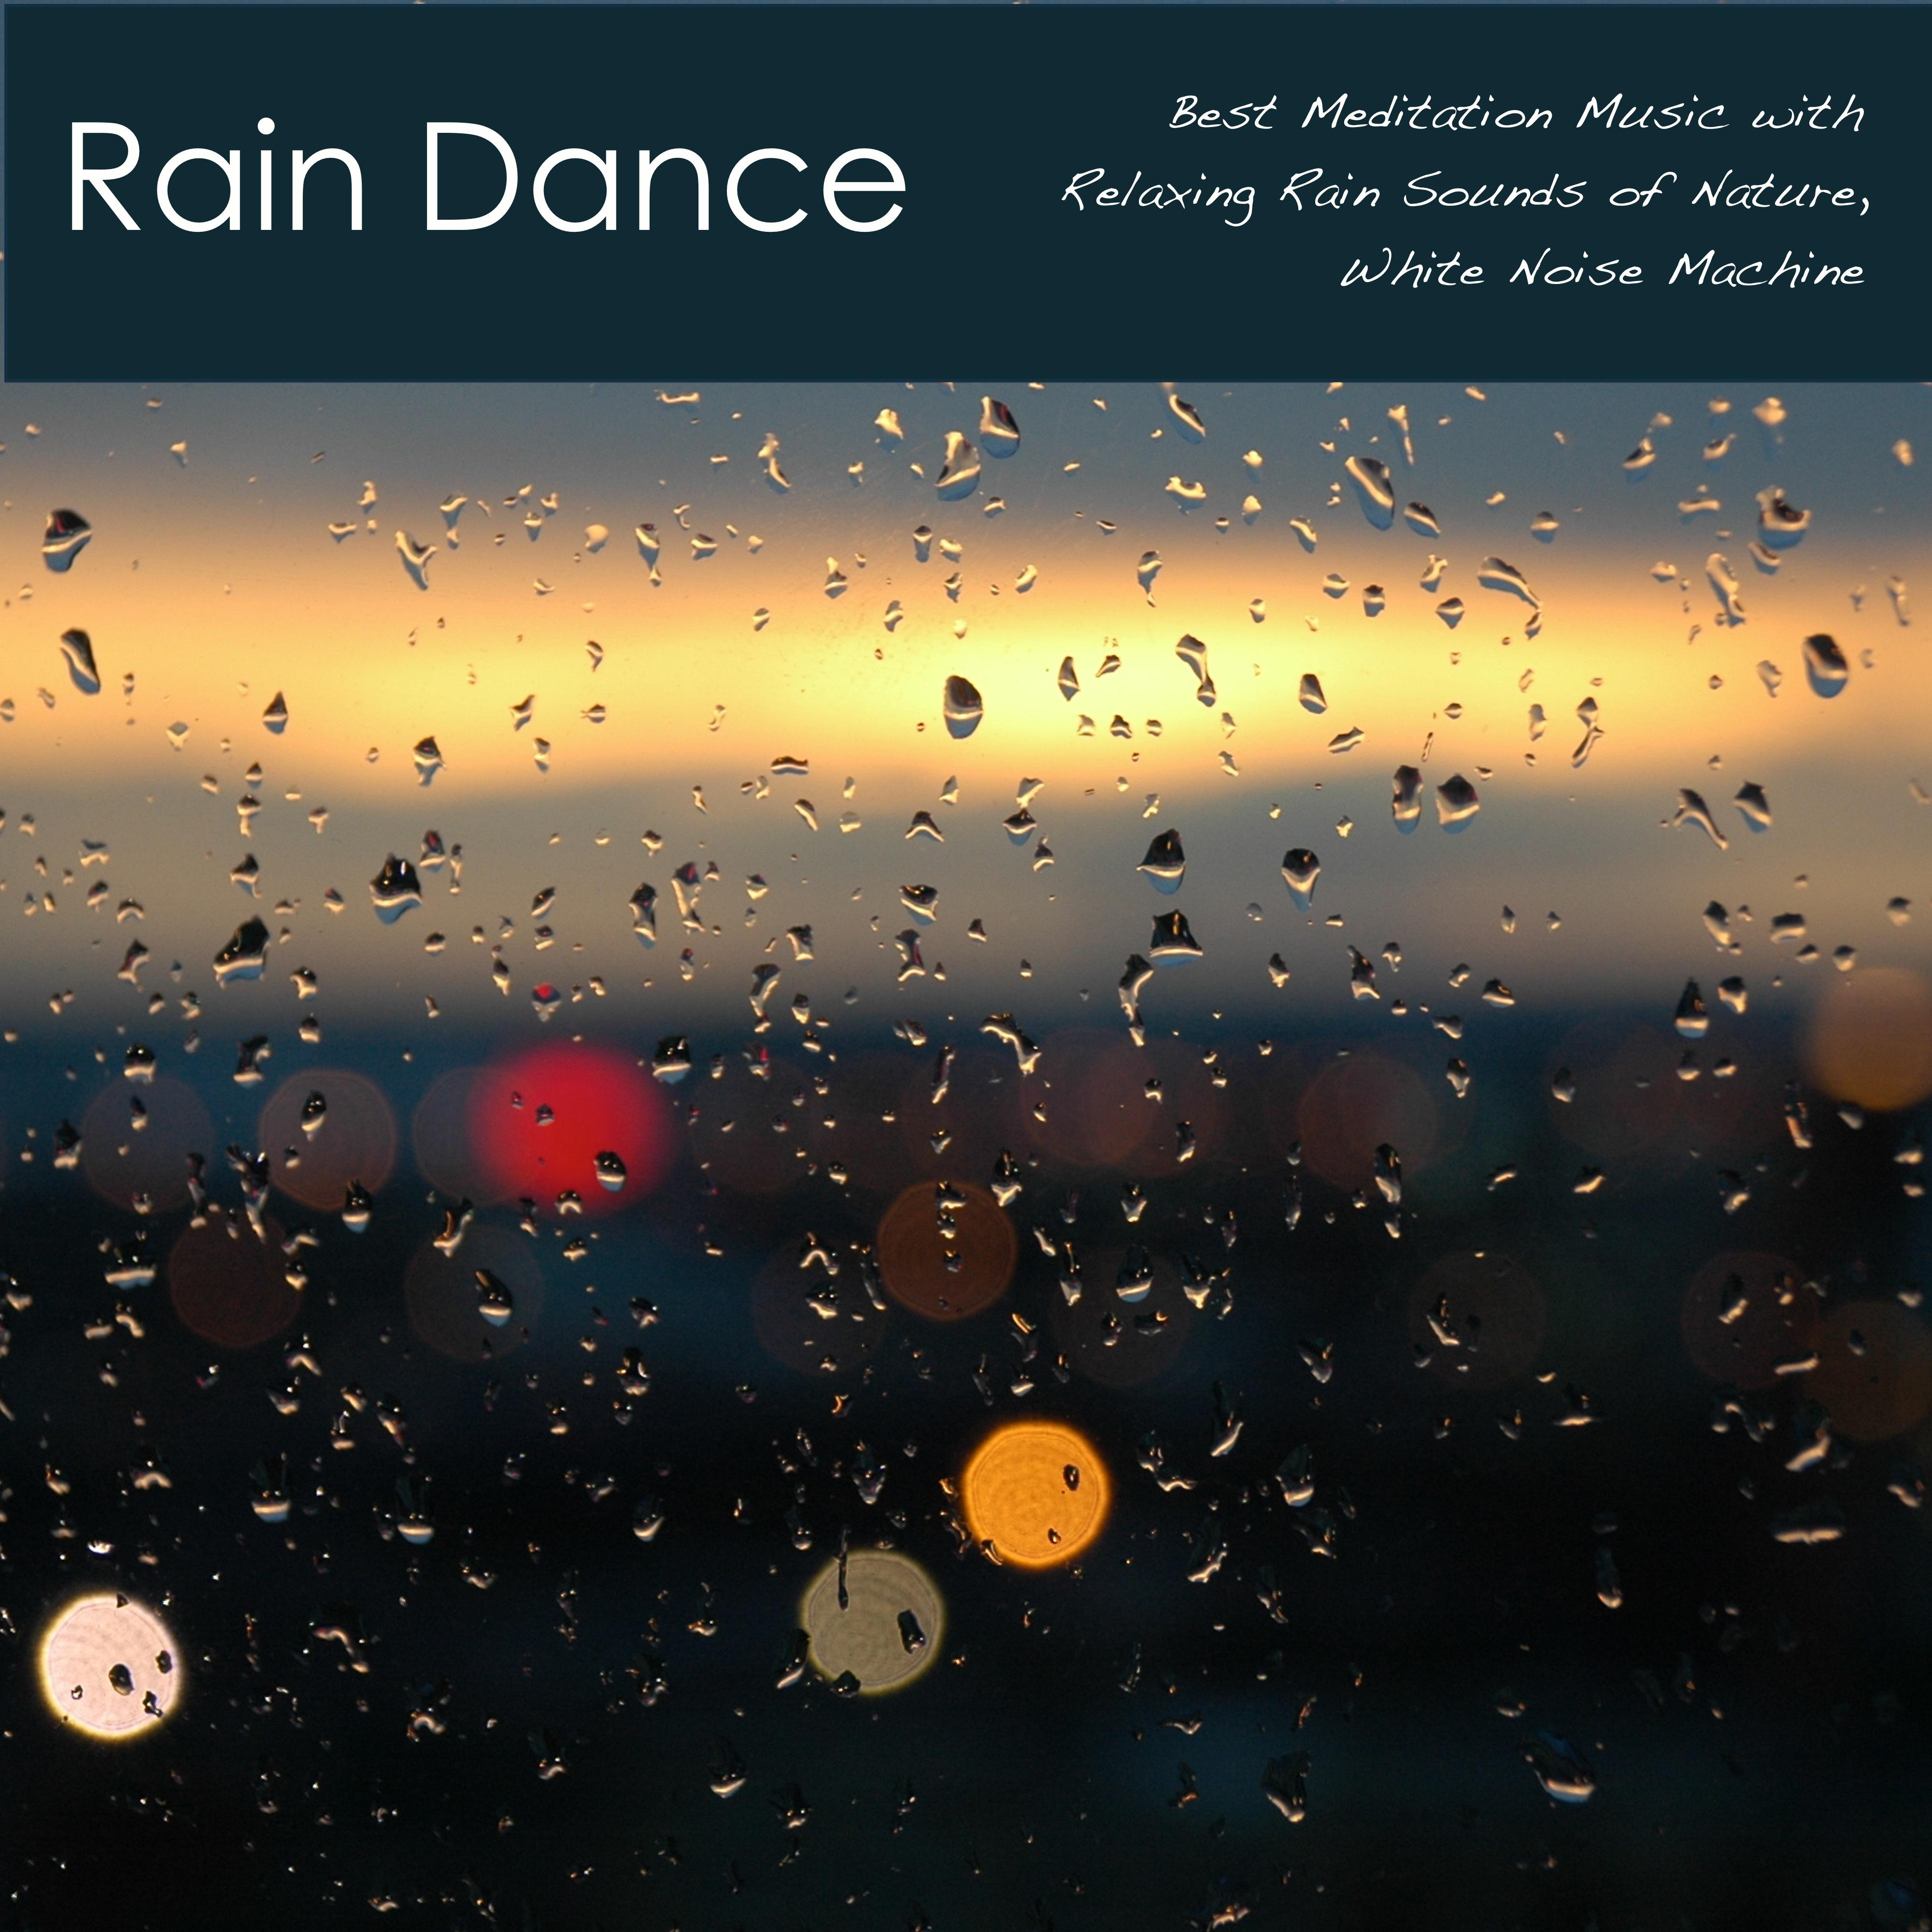 Rain Dance - Best Meditation Music with Relaxing Rain Sounds of Nature, White Noise Machine